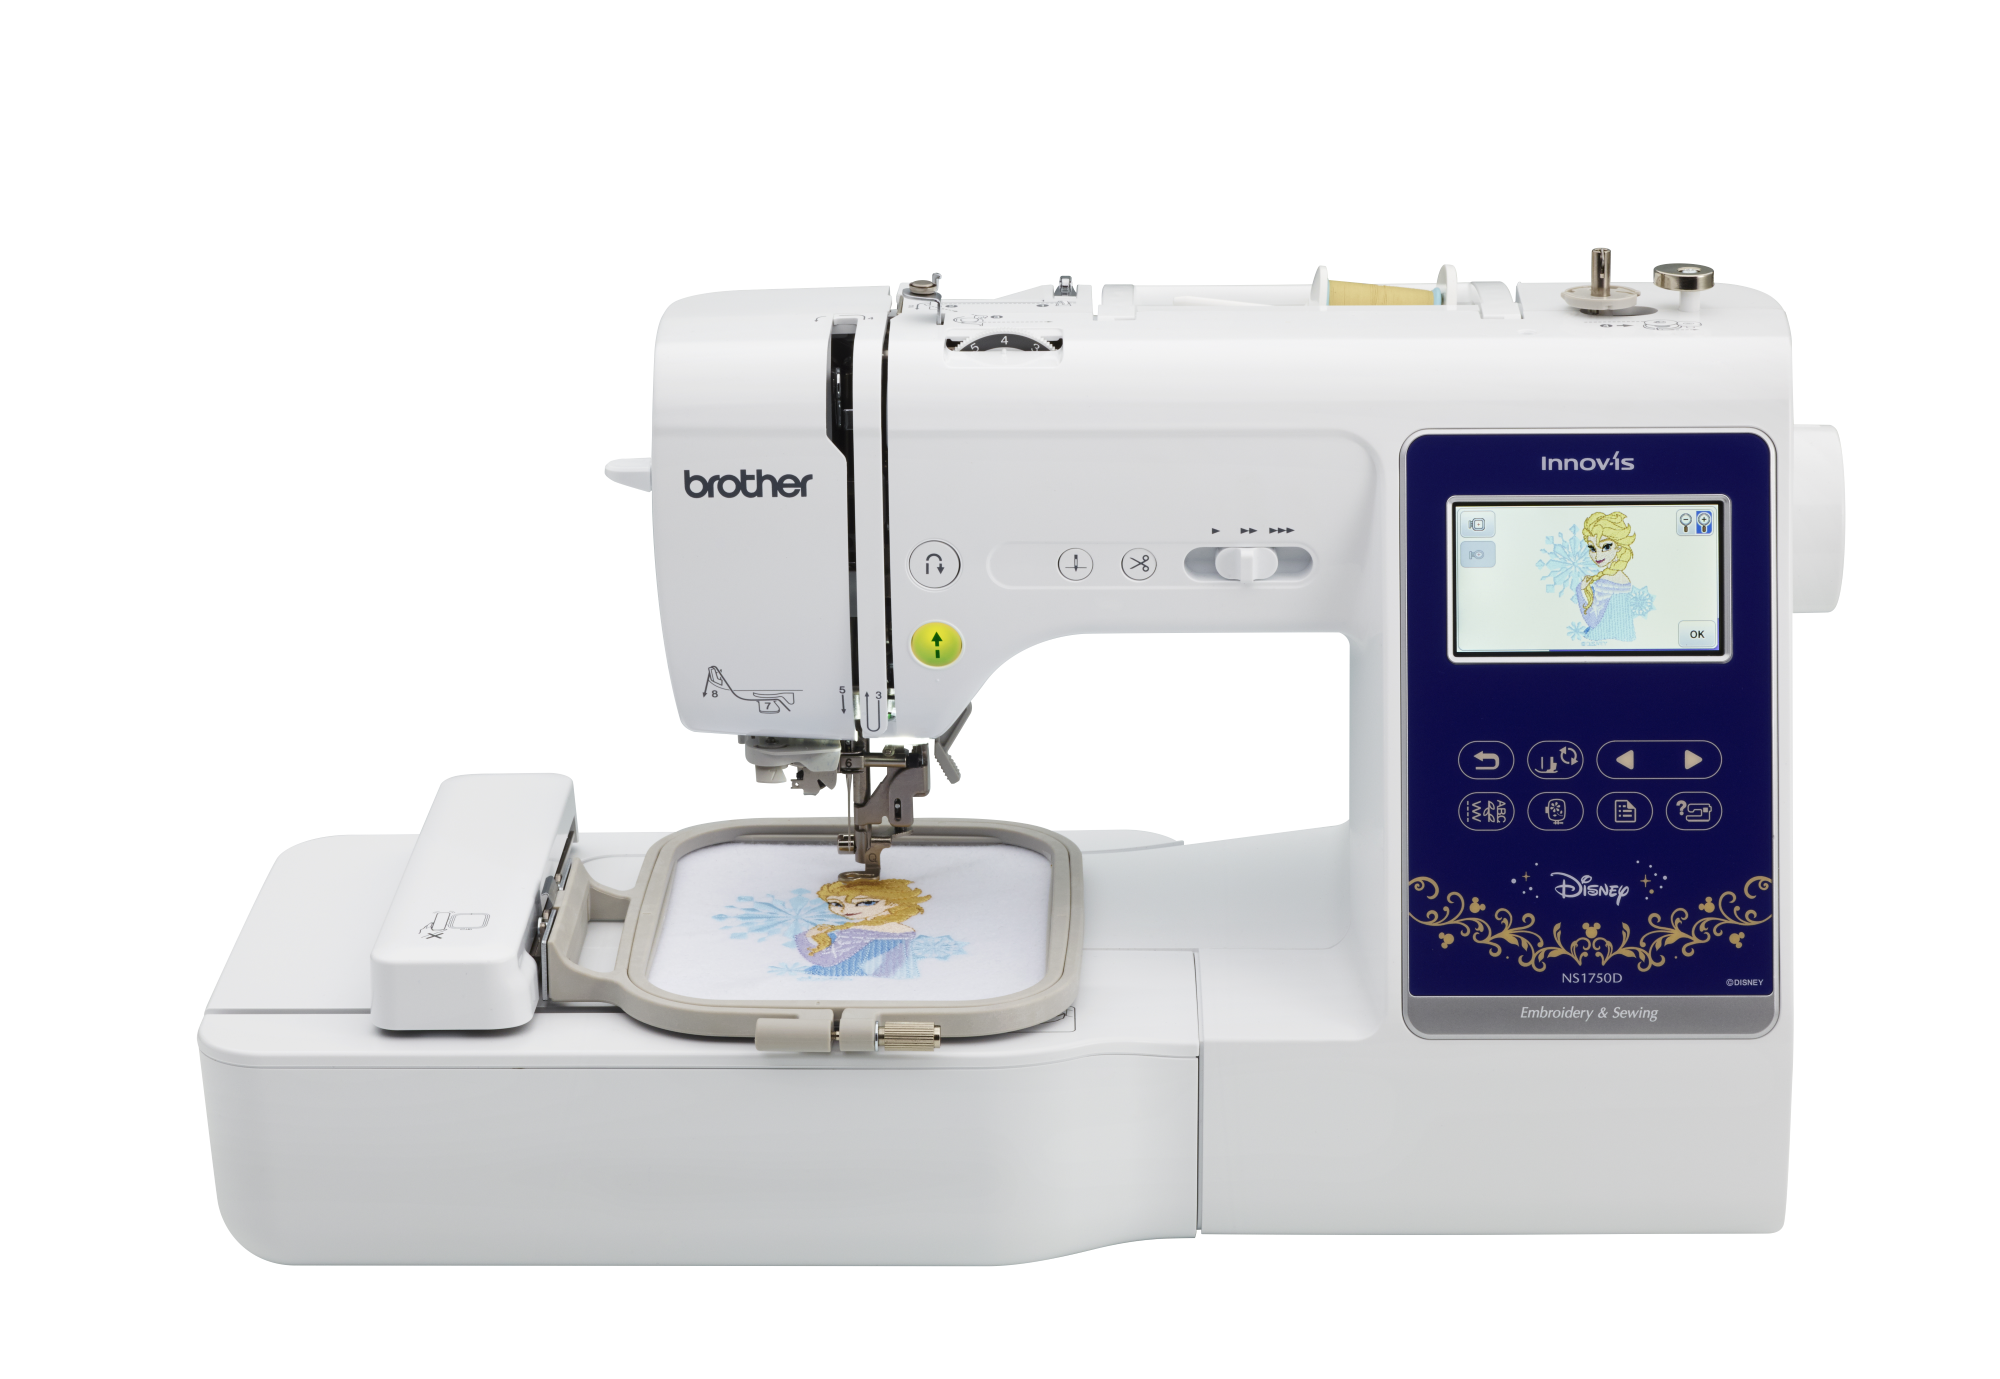 angled image of the Brother Innov-is NS1750D Sewing and Embroidery Machine 4x4 with embroidery hoop